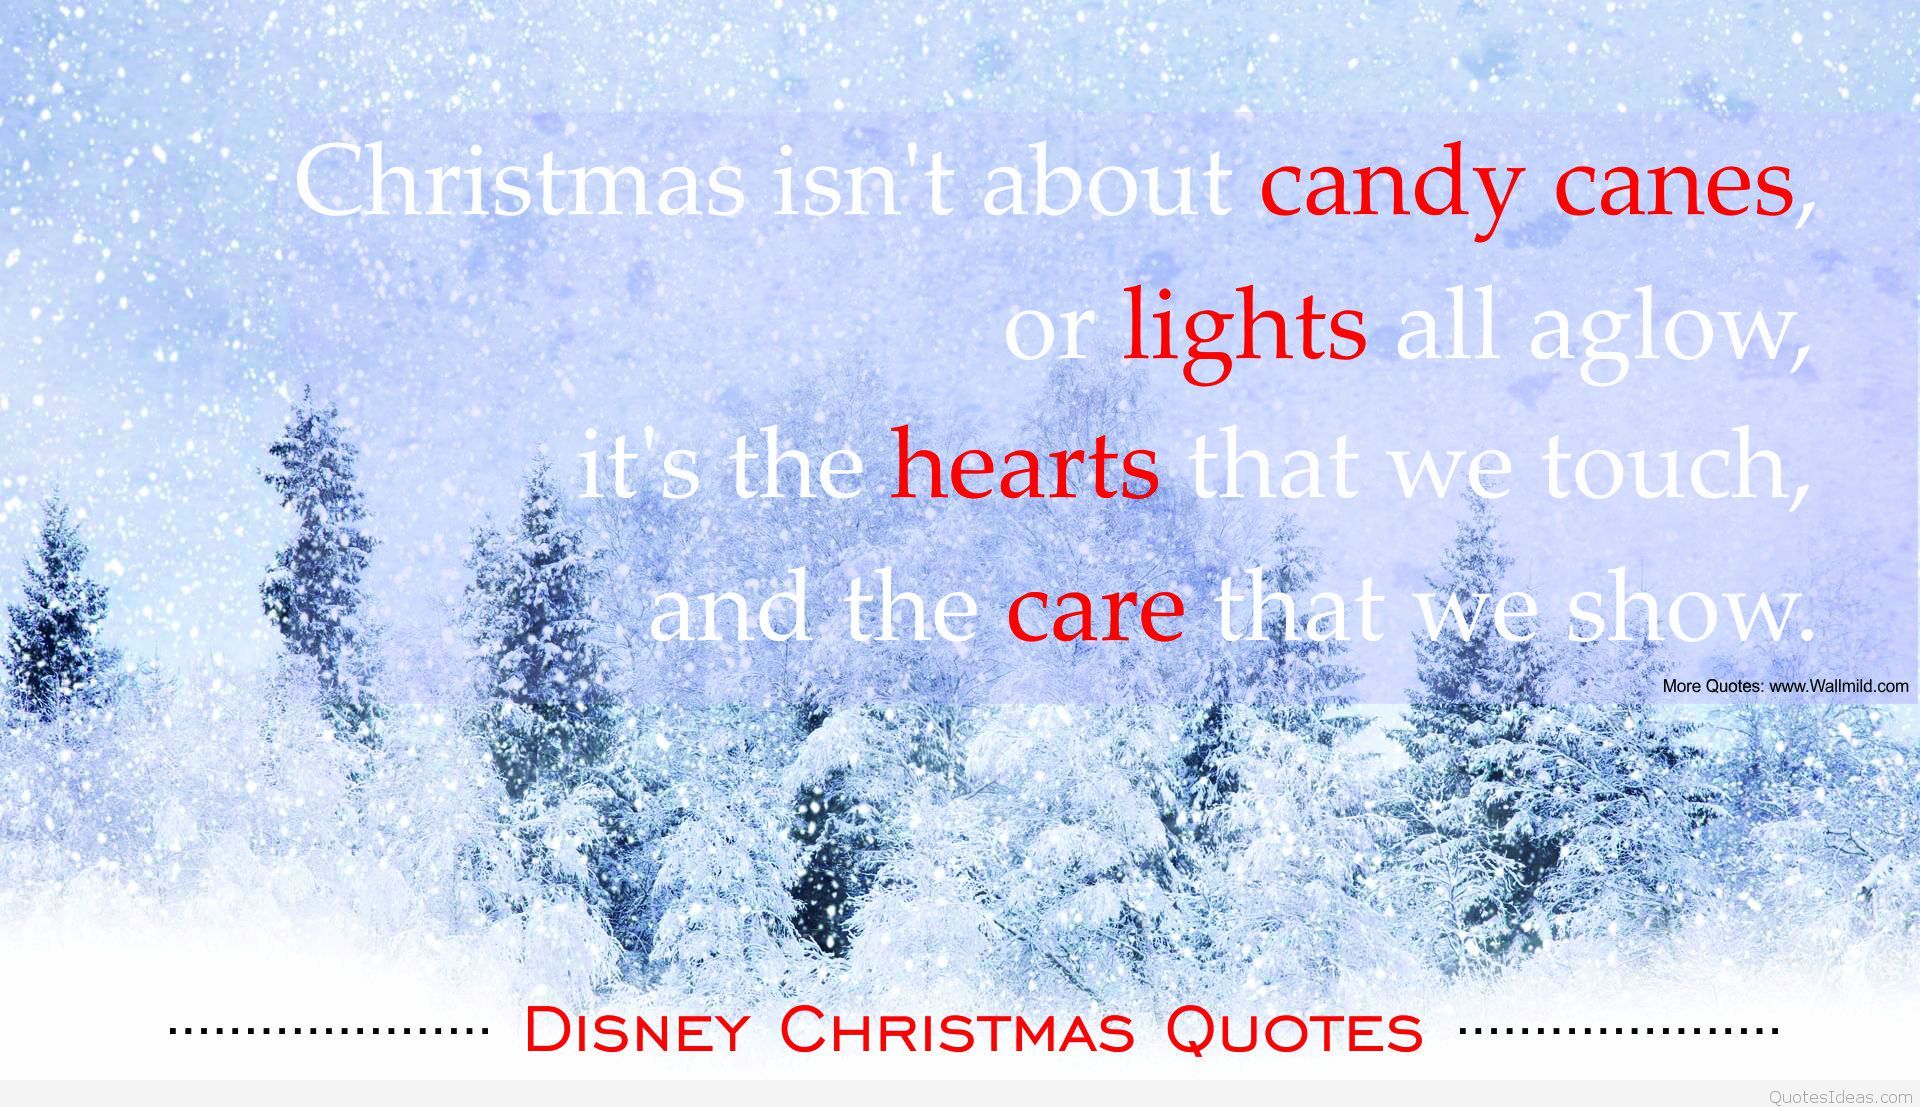 Cute Christmas Disney Quote With Cover - Christmas Inspirational Quotes For Kids - HD Wallpaper 